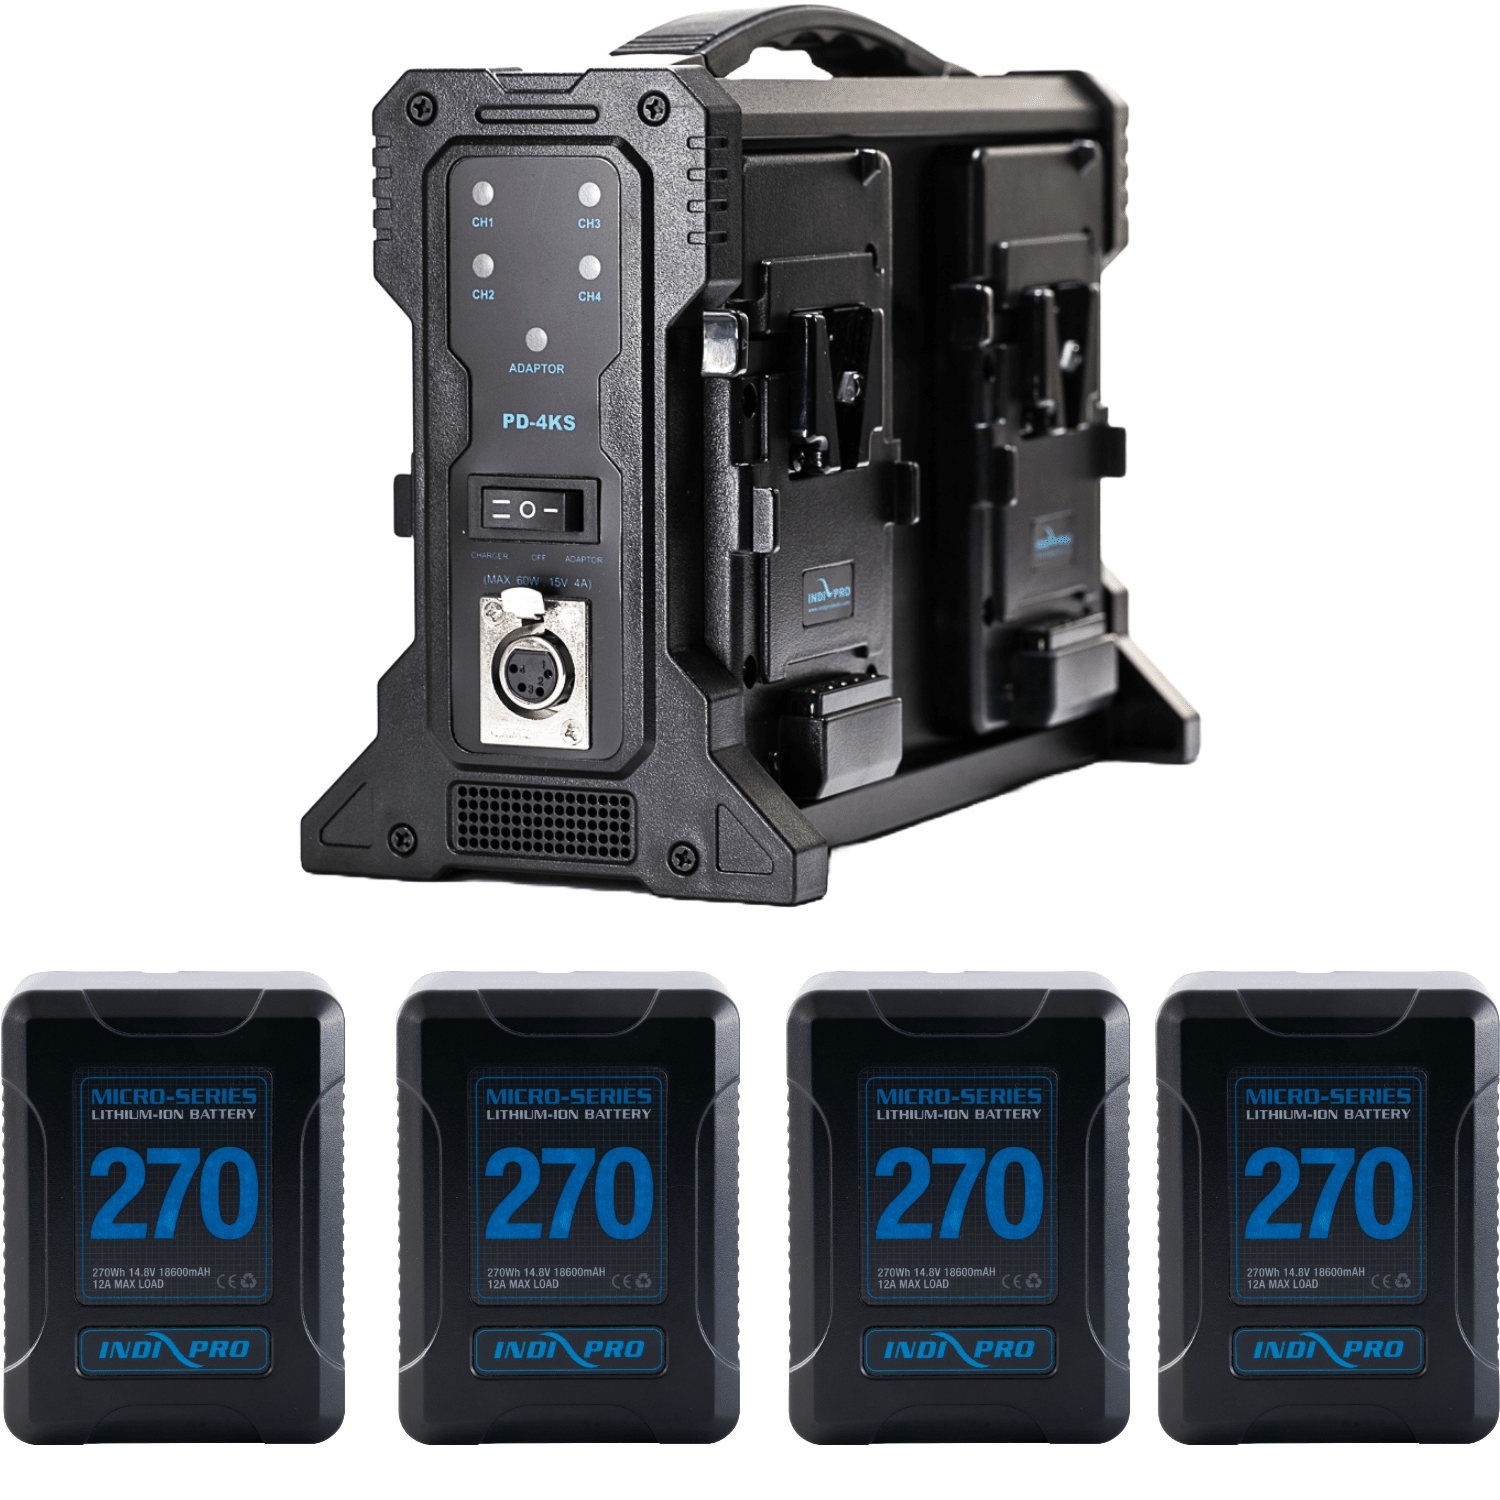 Micro-Series 270Wh 4-Battery Kit with Quad Pro Charger (V-Mount) Battery Kit Indipro Tools 